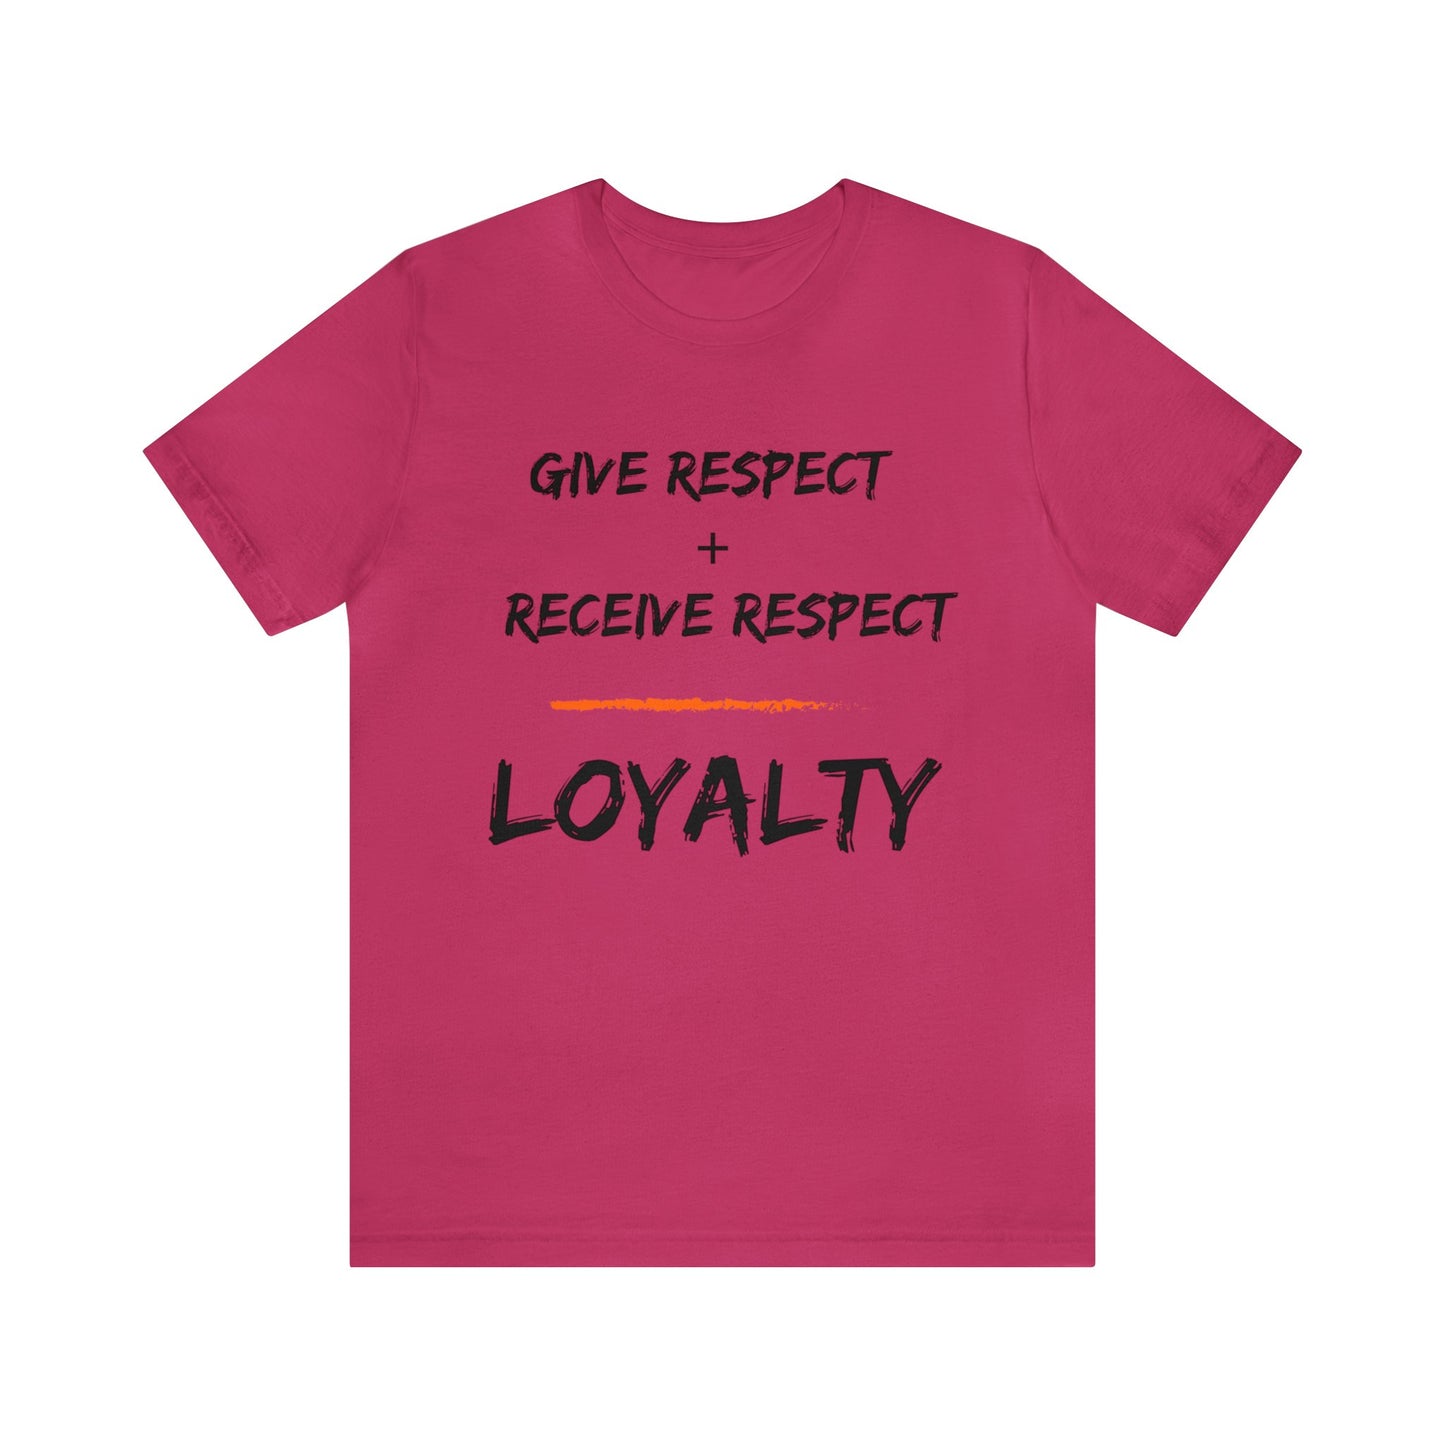 Give Respect + Receive Respect = Loyalty (B-Writing) Unisex Jersey Short Sleeve Tee